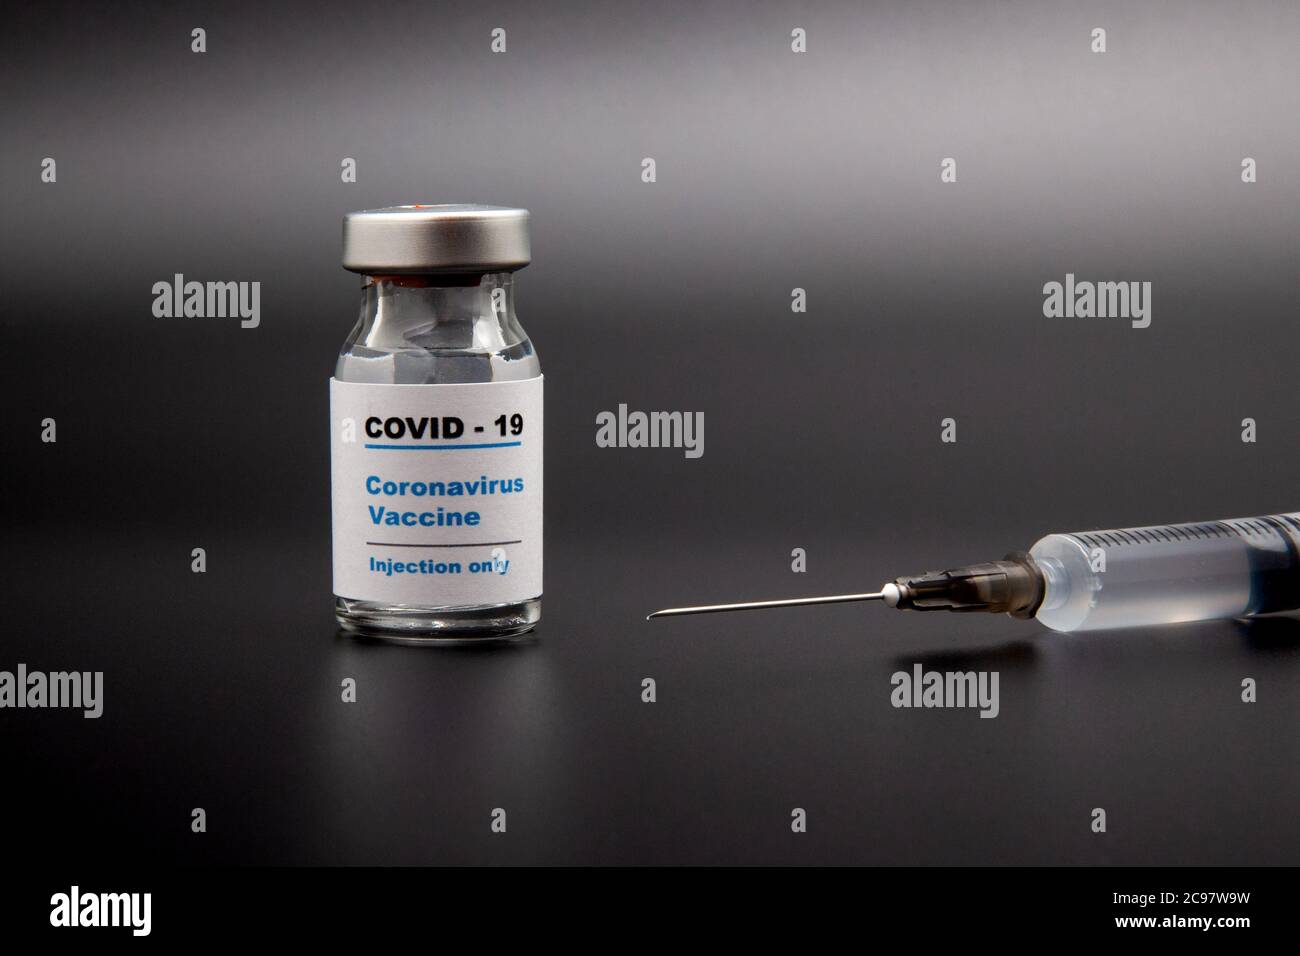 Small vaccine bottle (phial) with a label that read 'Covid - 19 Corona virus Vaccine injection only' & a medical syringe isolated on black Vaccination Stock Photo